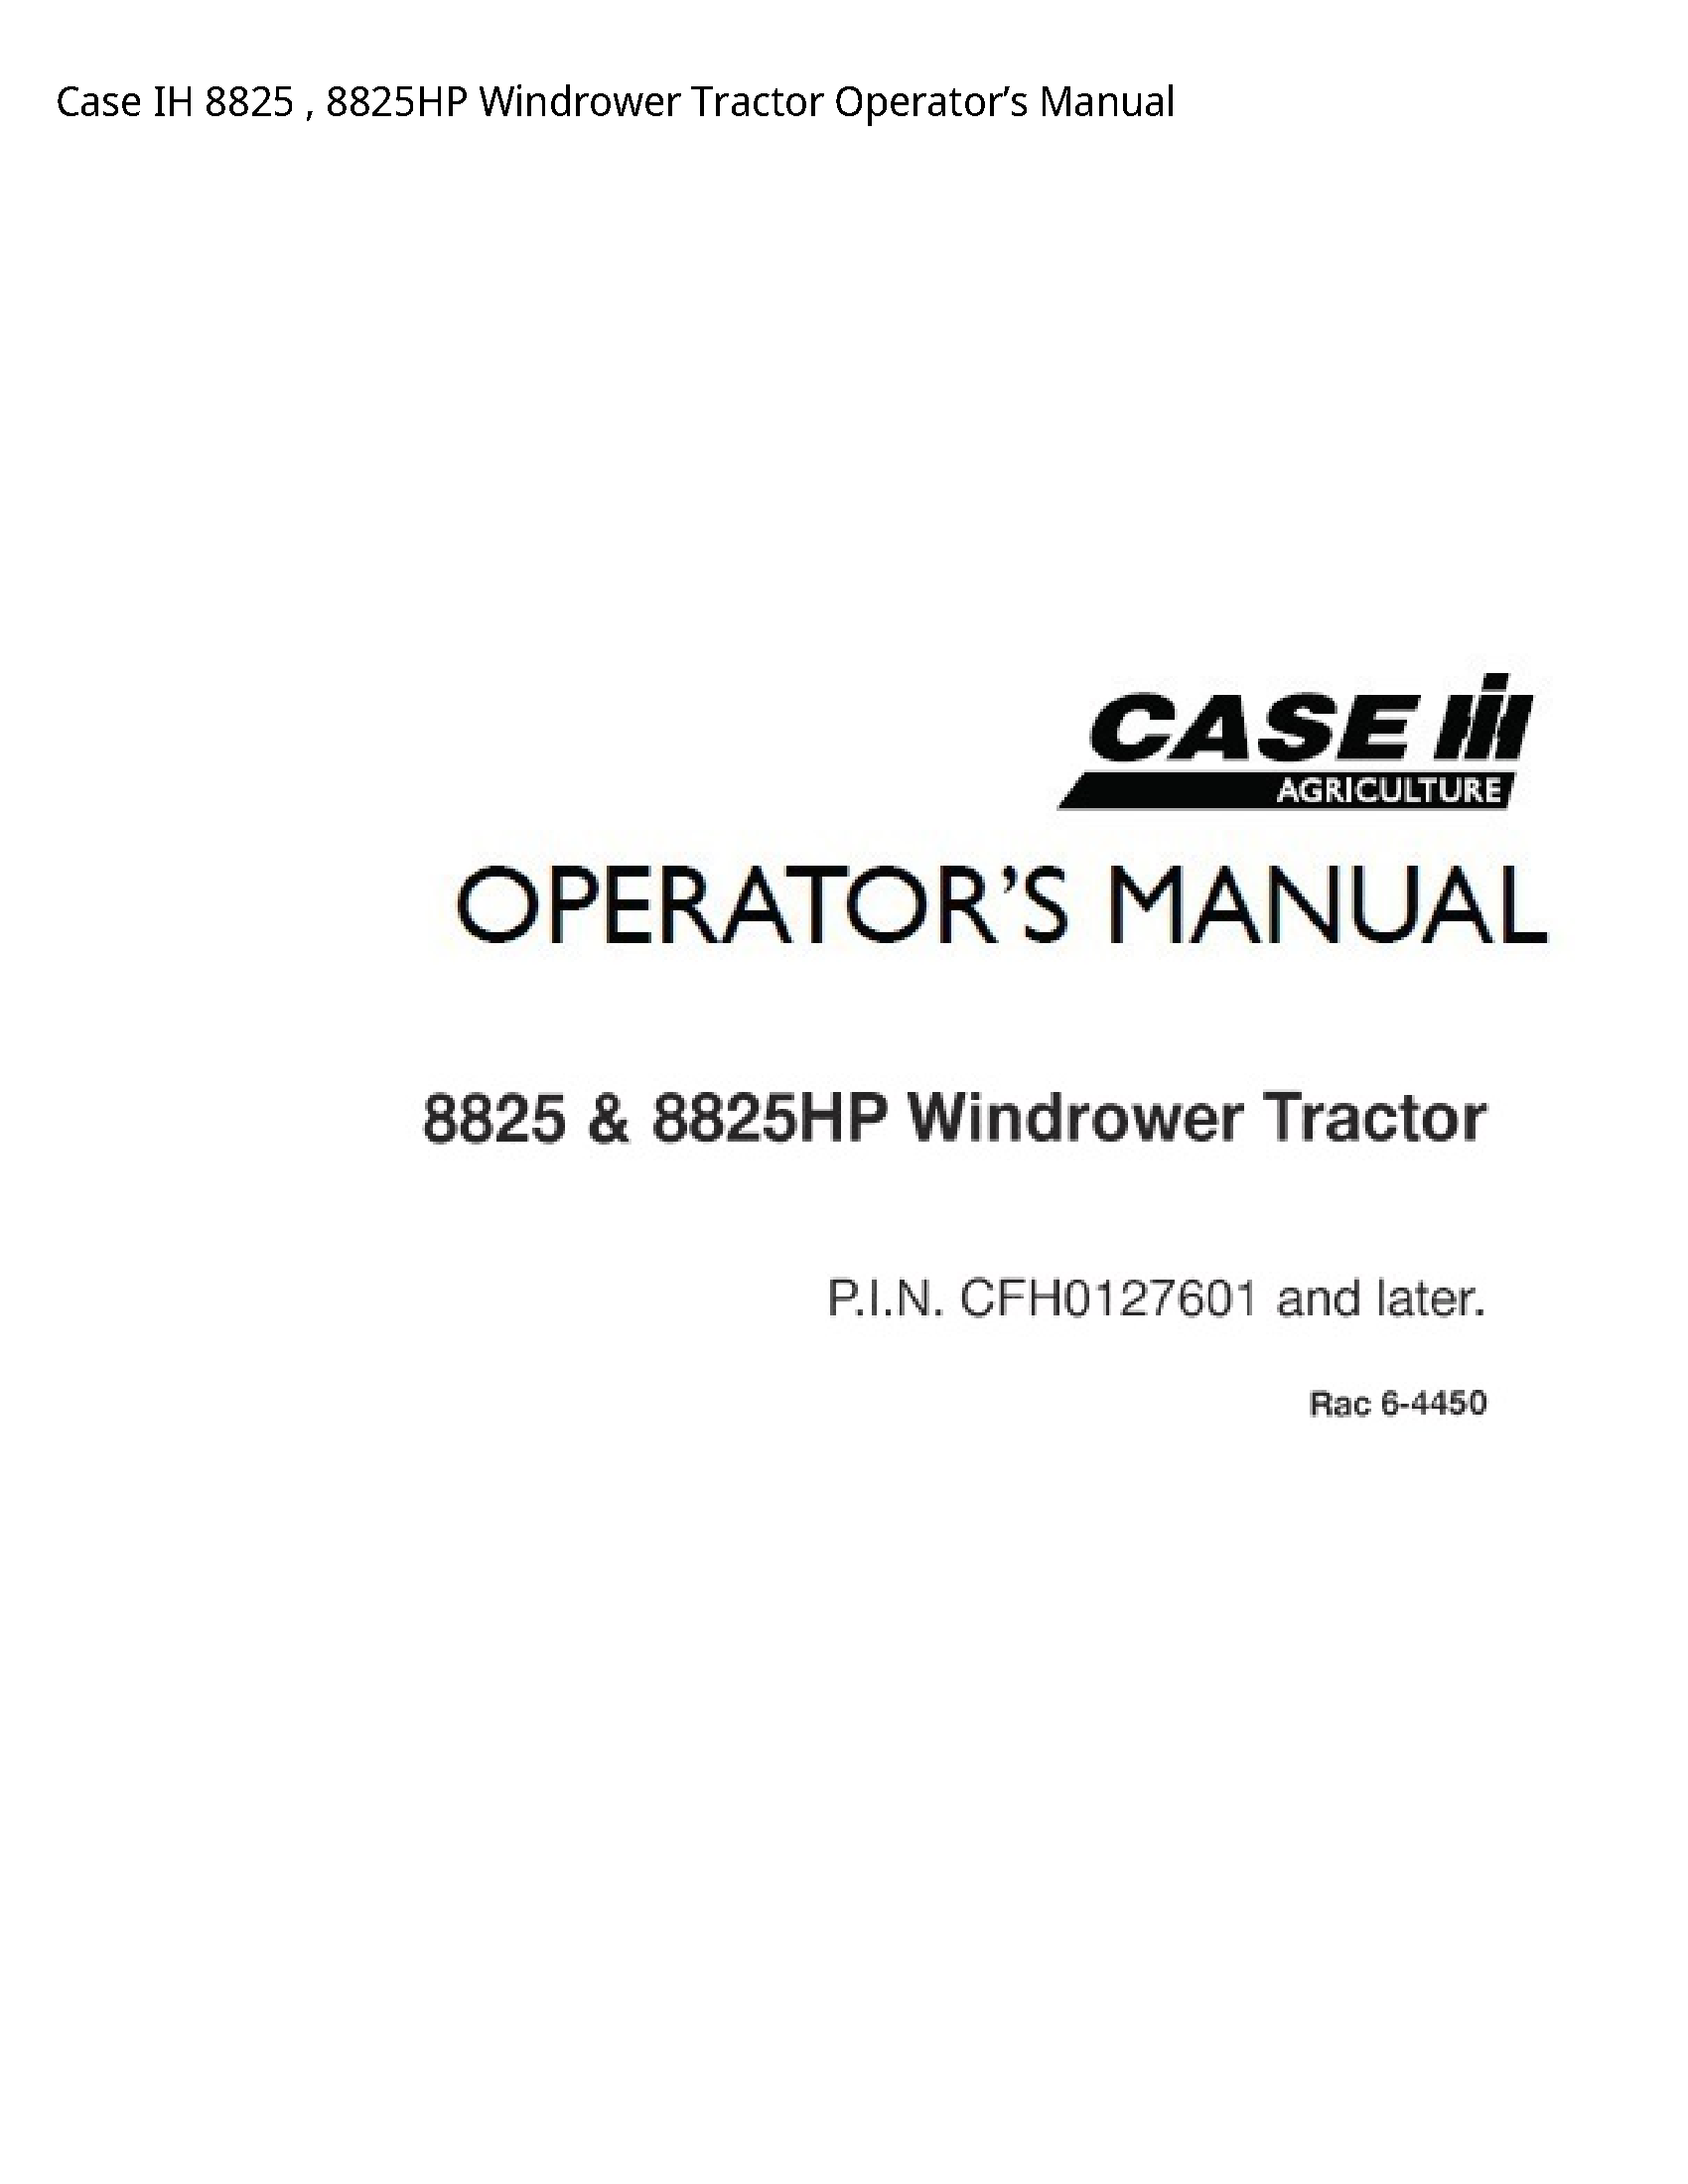 Case/Case IH 8825 IH Windrower Tractor Operator’s manual